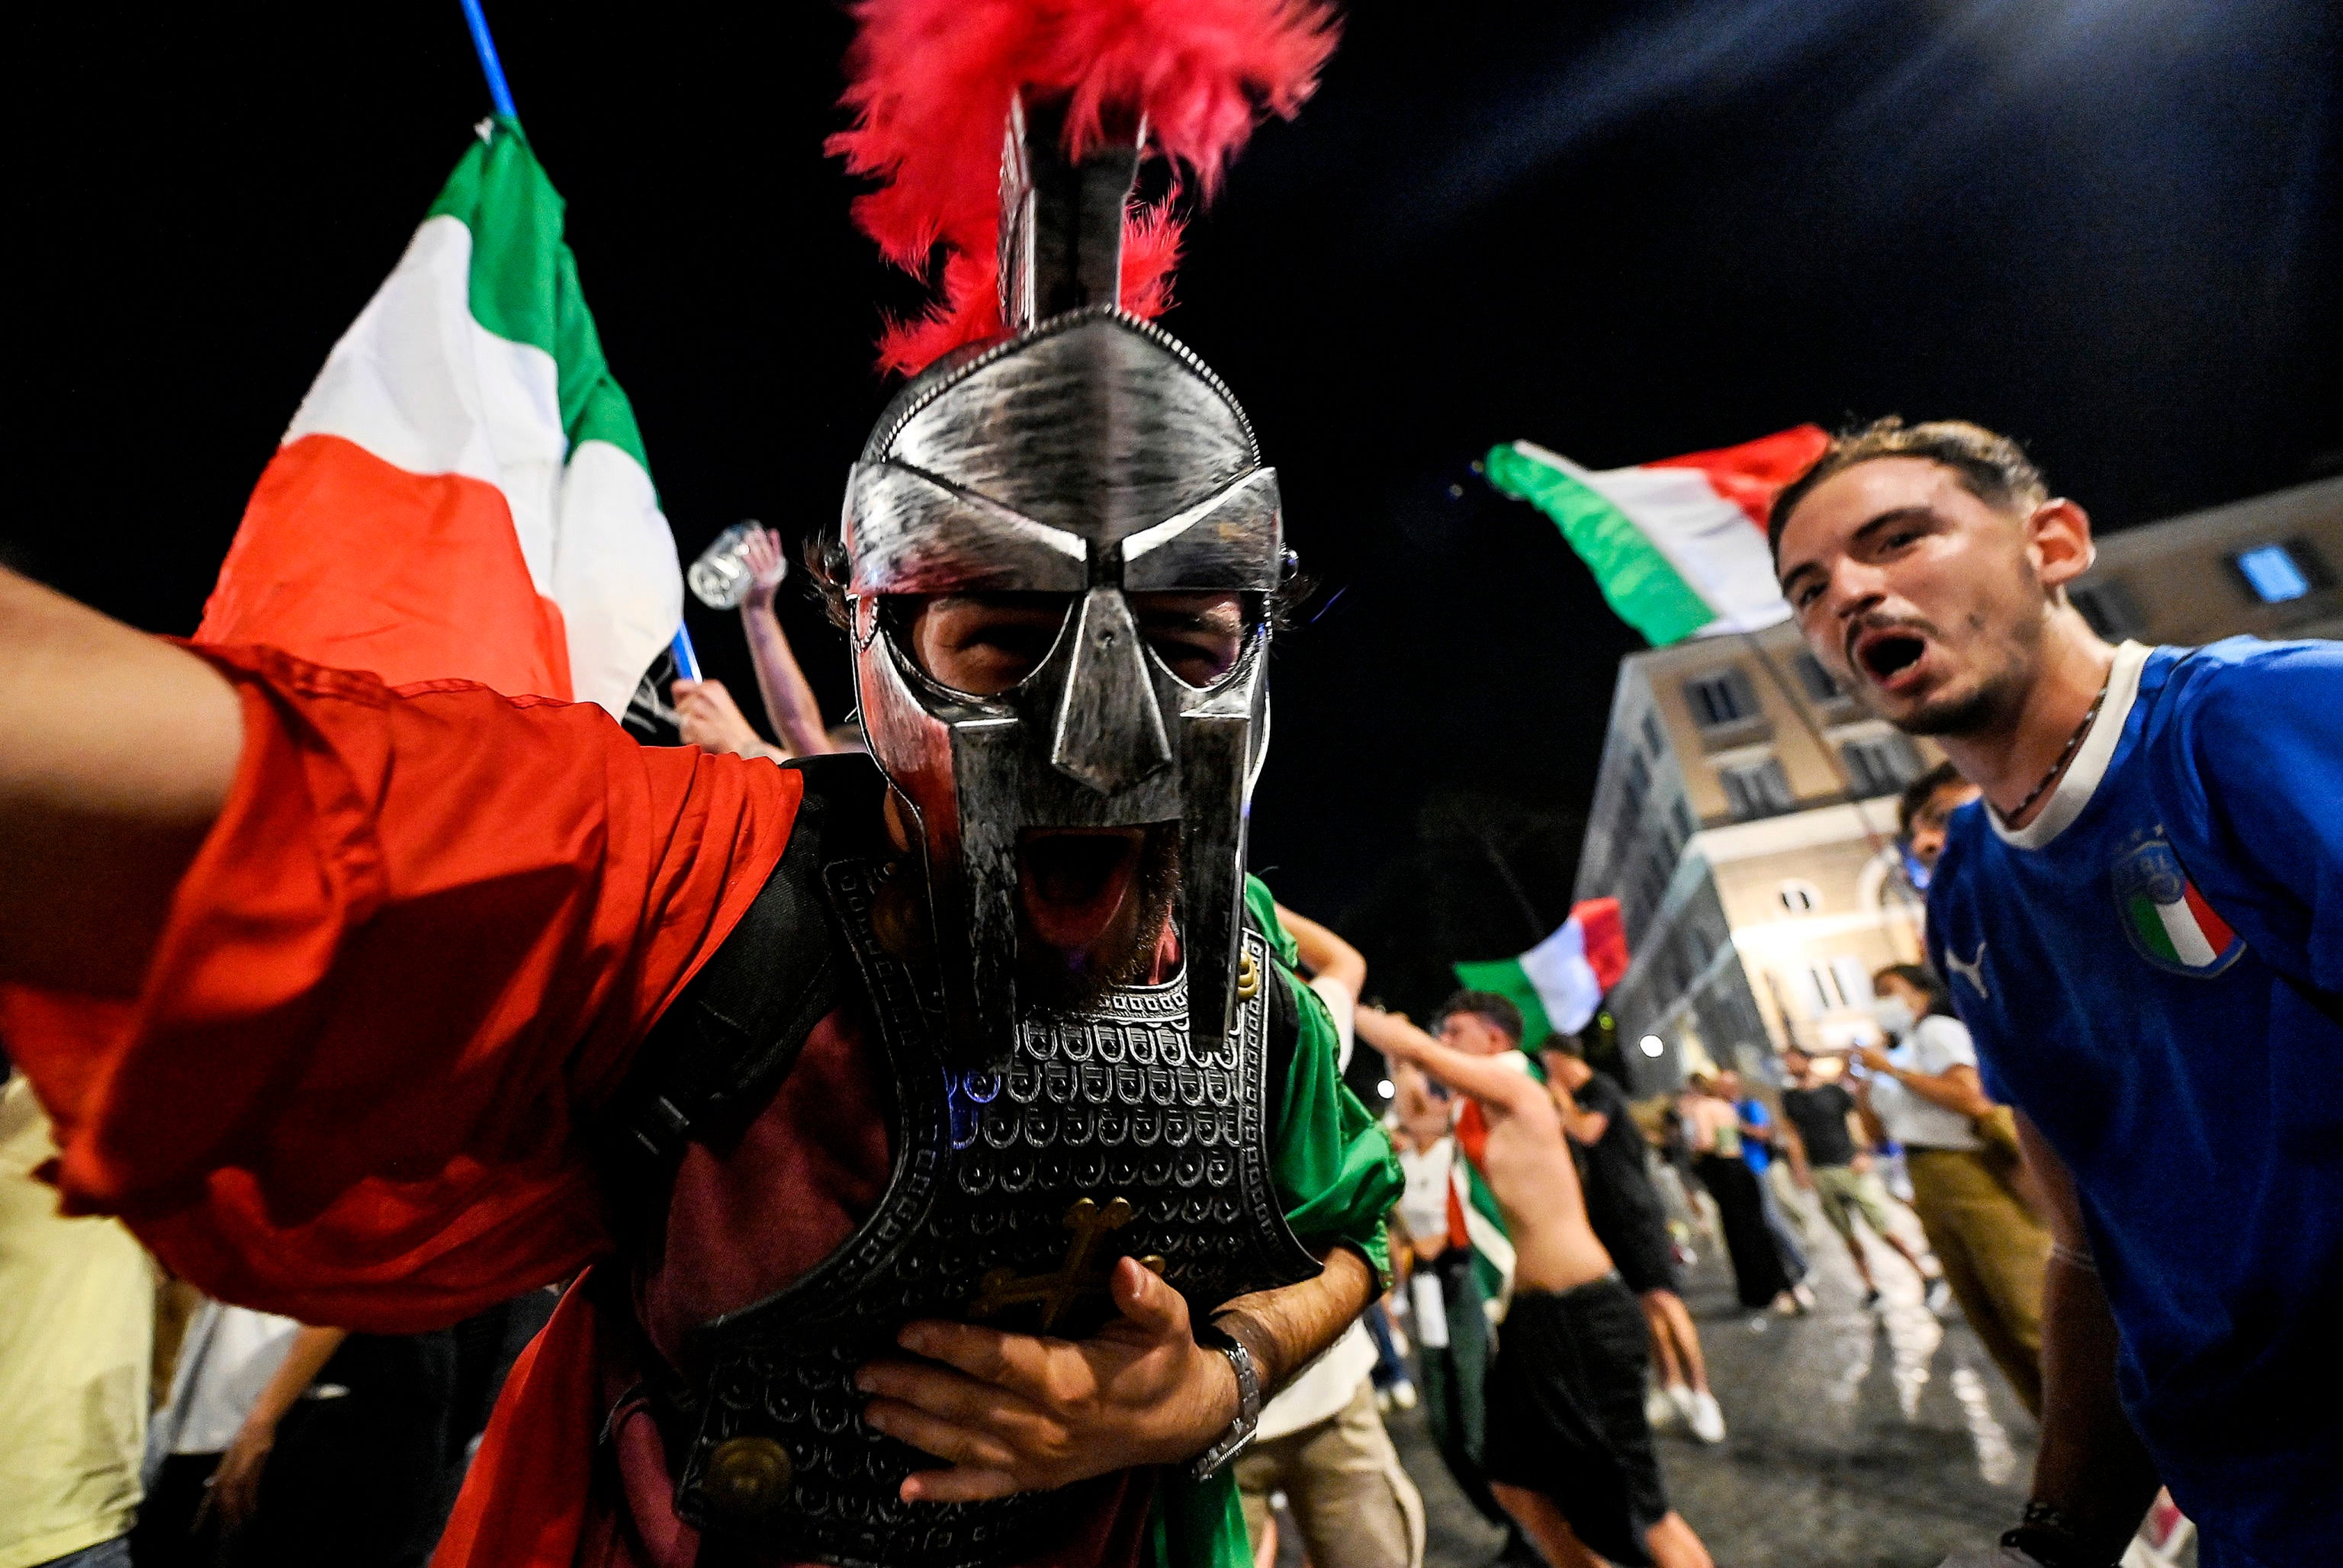 Italy’s supporters watch the UEFA EURO 2020 Championship Final in Rome